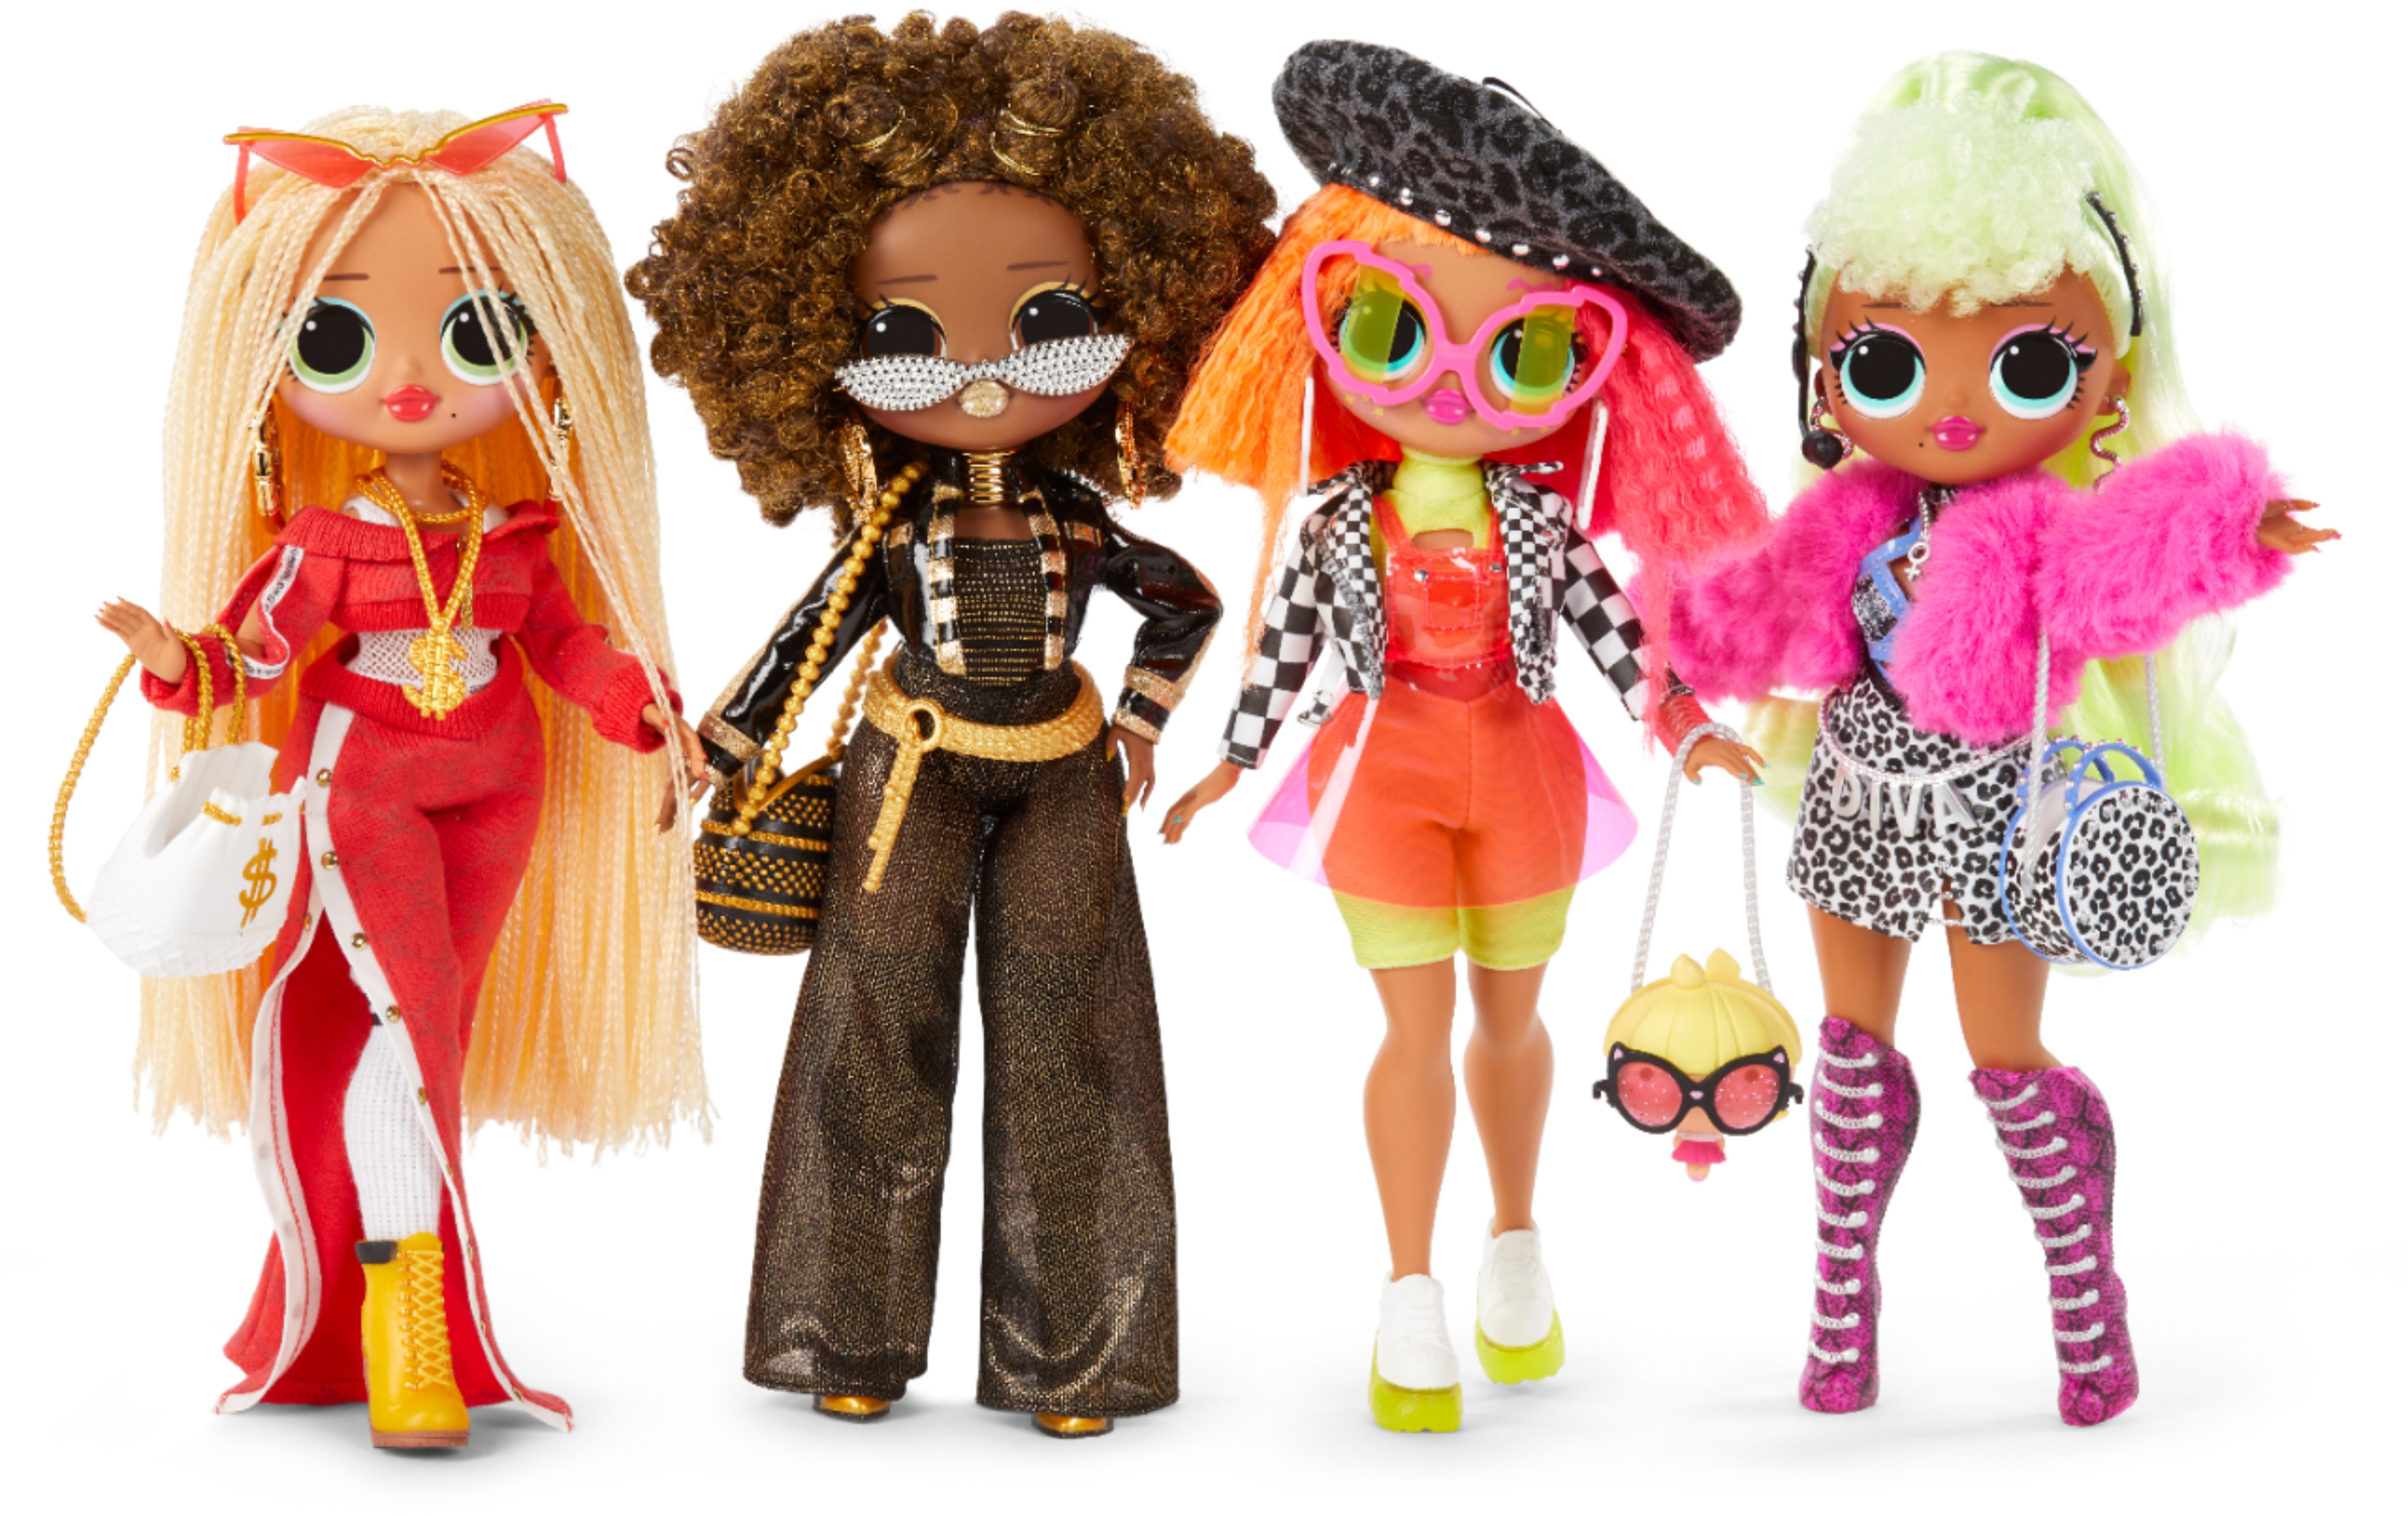 L.O.L. Surprise! O.M.G. Fashion Doll Styles May Vary 559788 - Best Buy